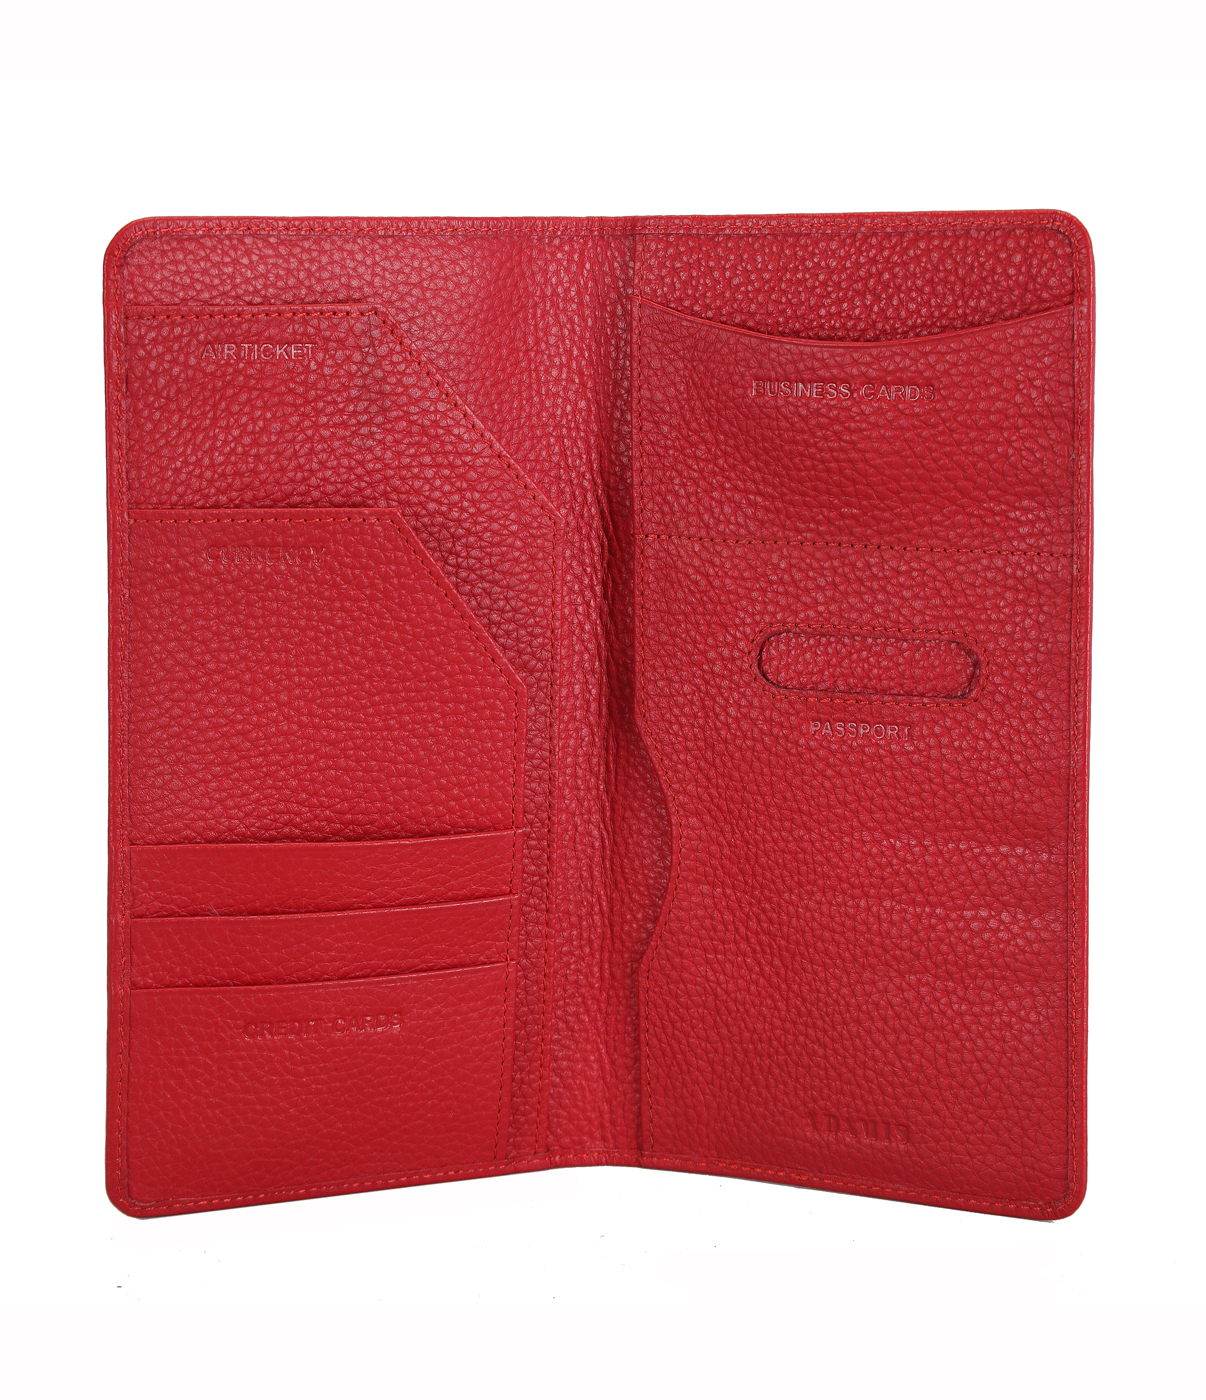 Wallet-Rafel -Travel document wallet in Genuine Leather - Red